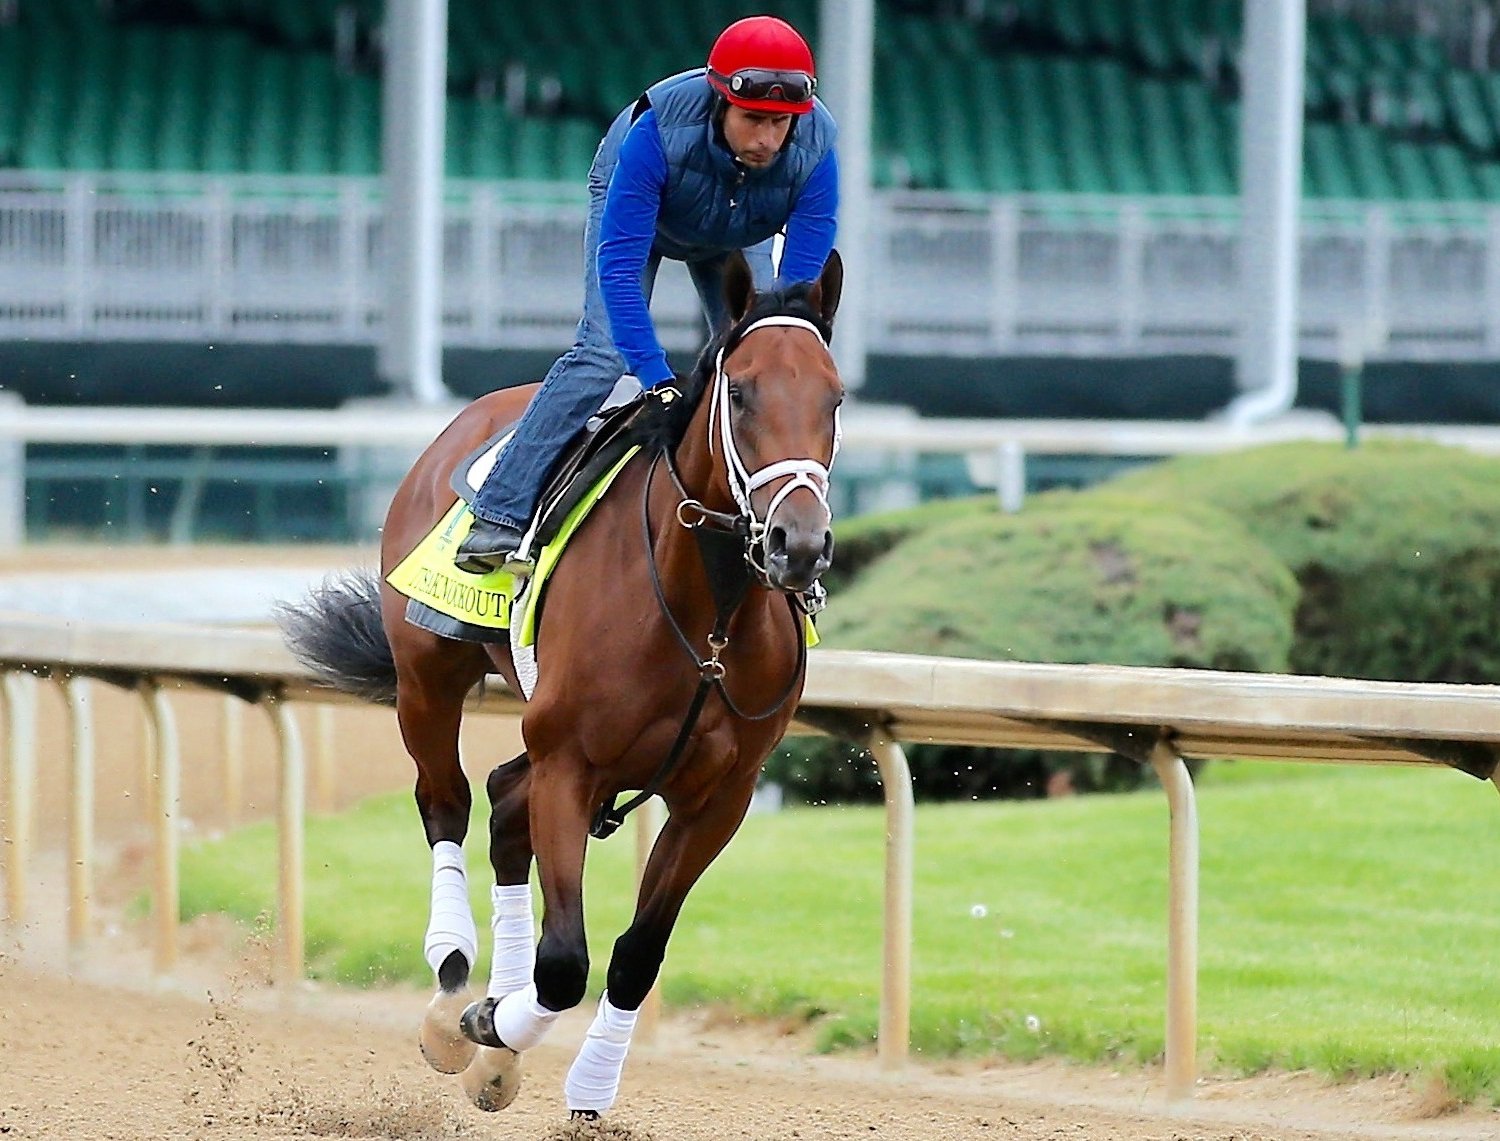 2015 Kentucky Derby Horses Ranking Every Contender at Churchill Downs